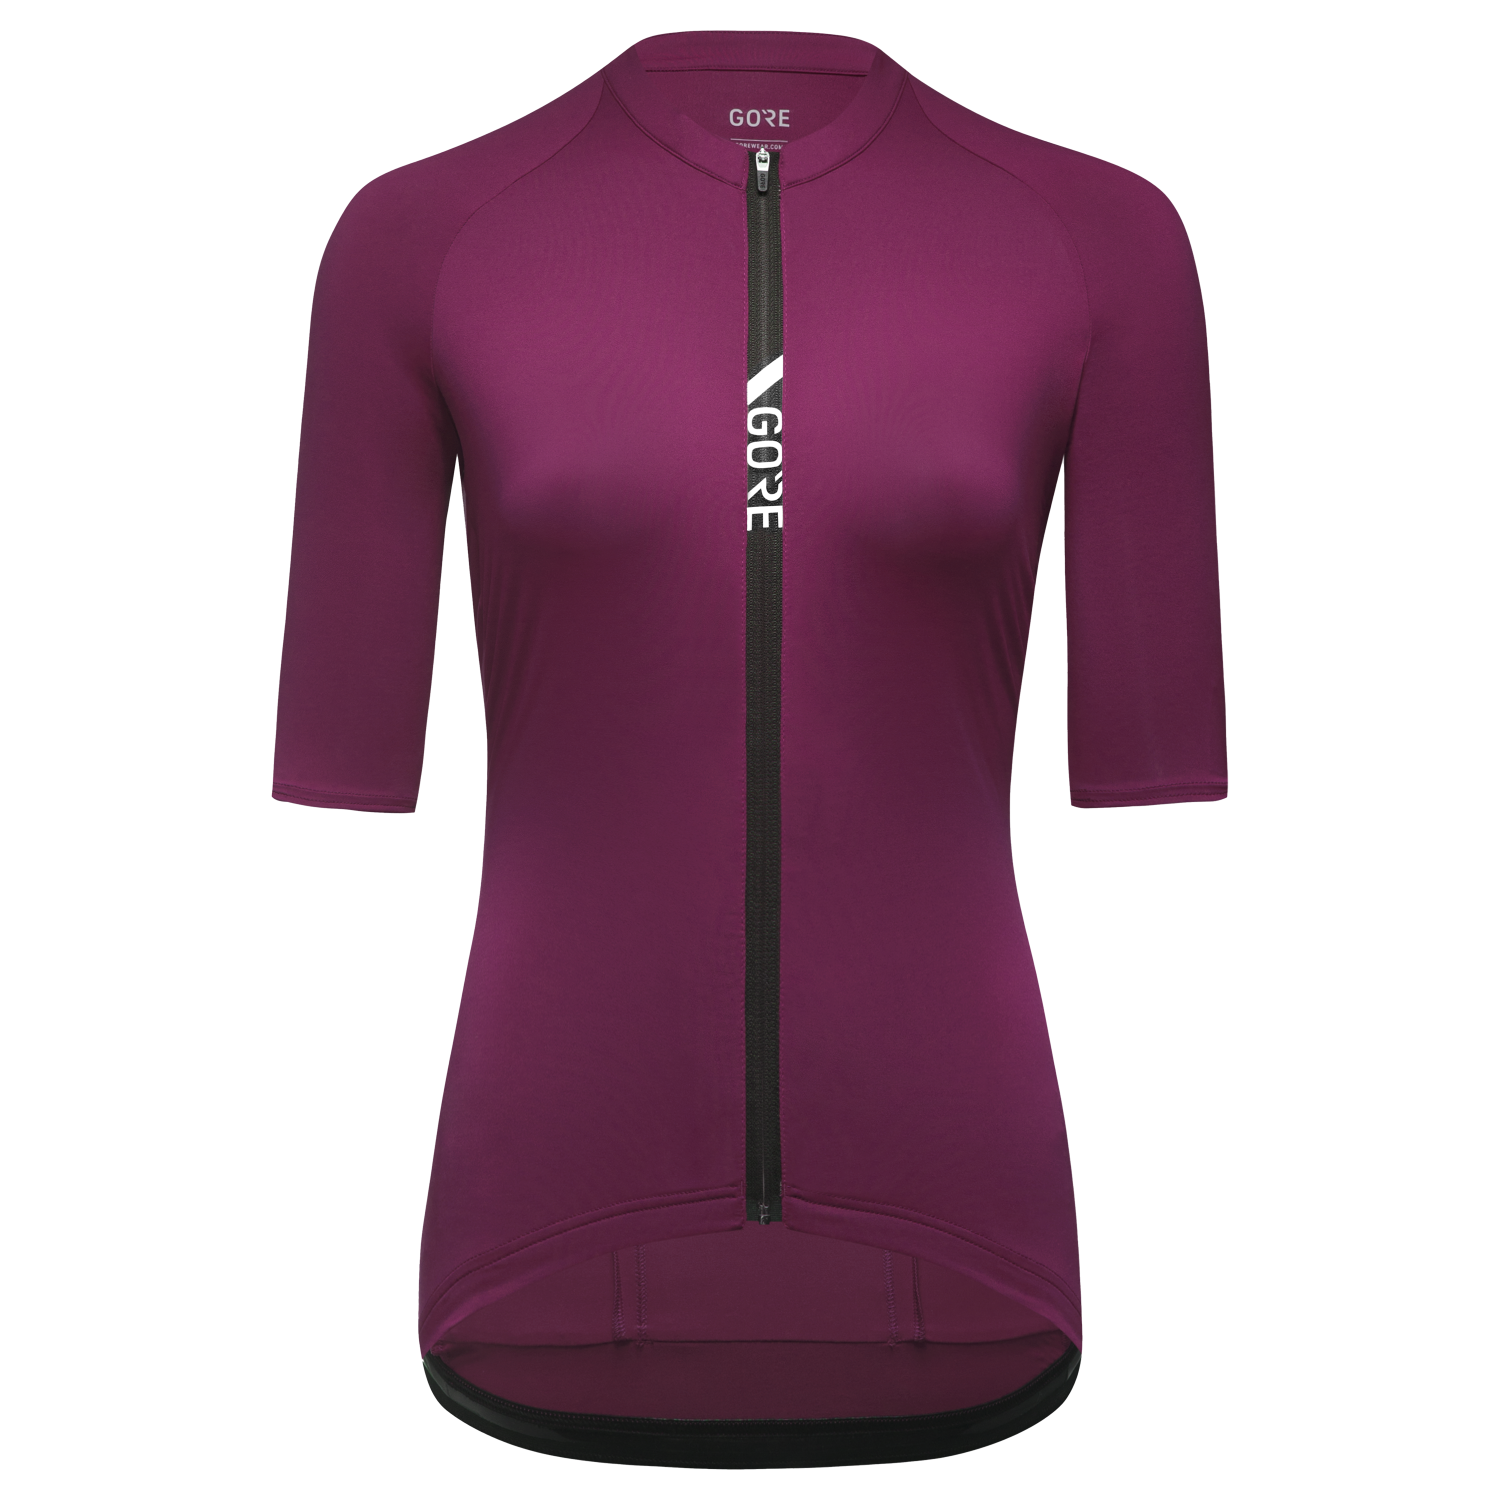 GOREWEAR Torrent Cycling Jersey Women's in Process Purple | Small (4-6) | Form fit